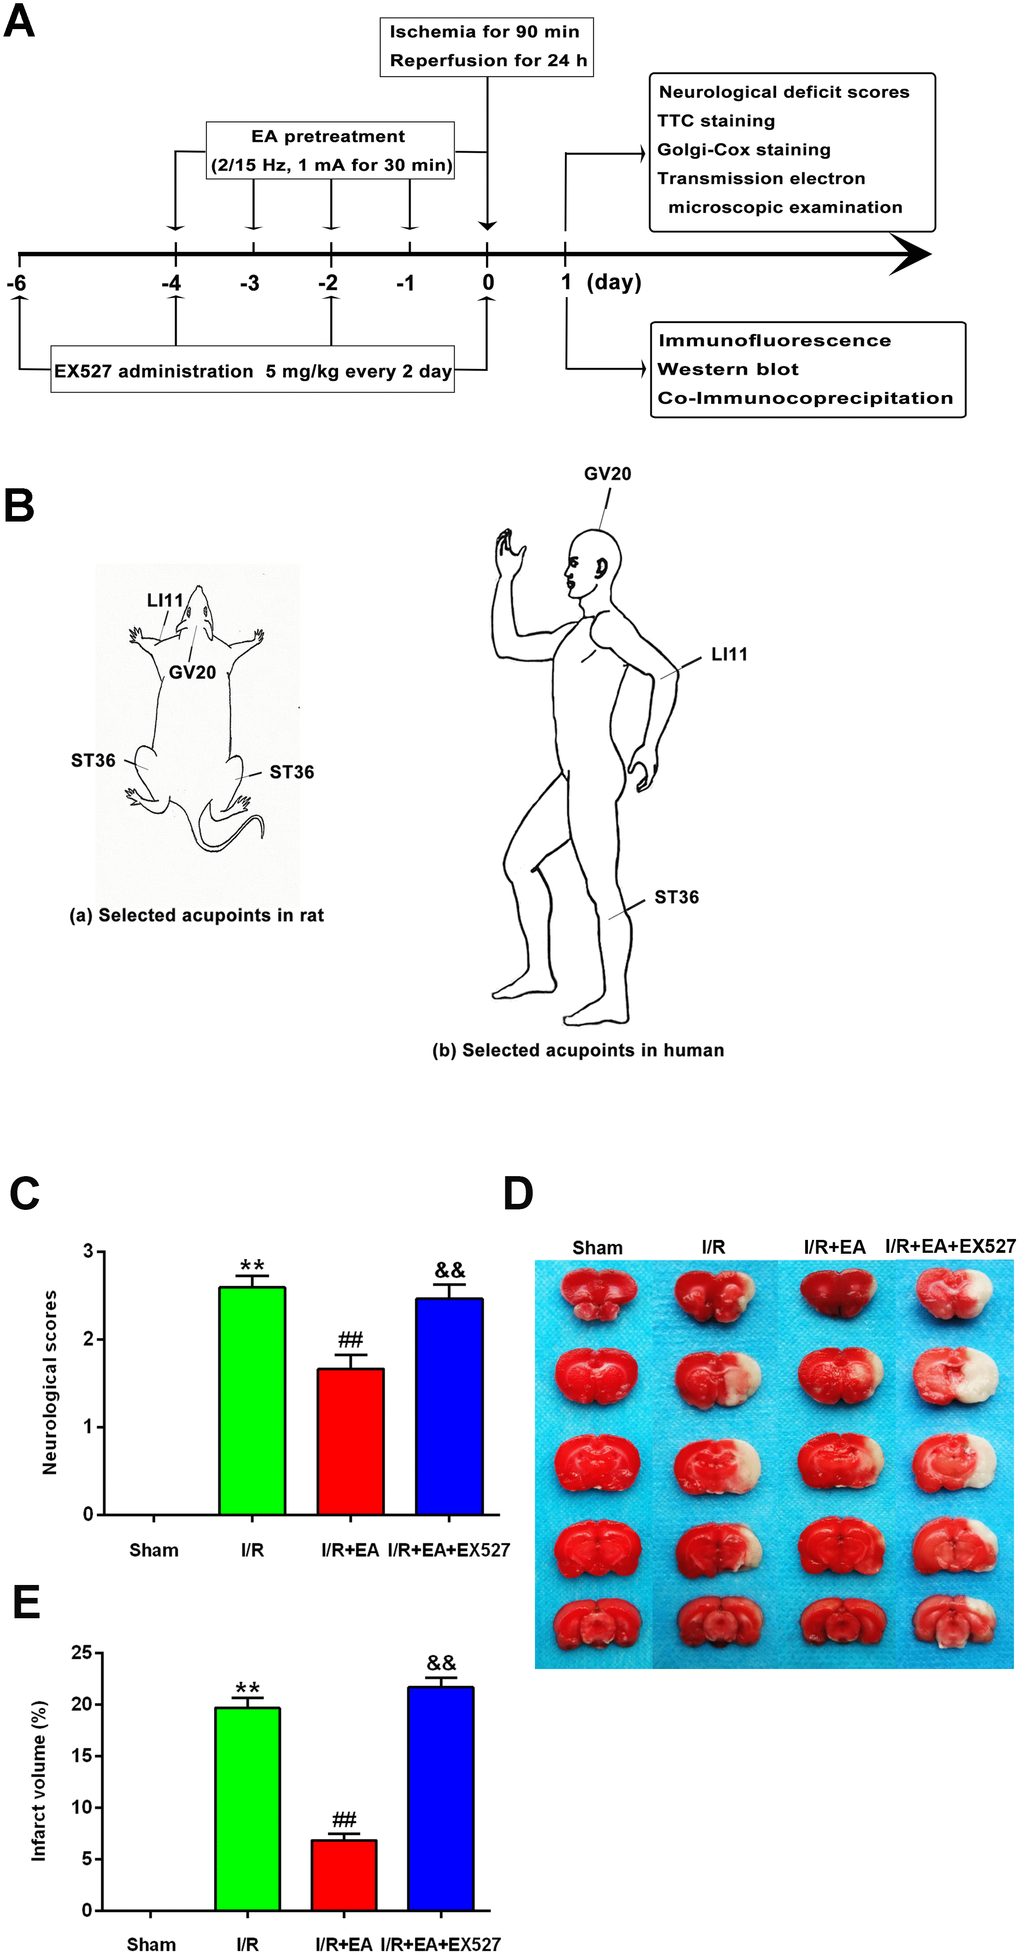 EA pretreatment ameliorated neurological deficits and reduced infarct volume in rats with CIR injury. (A) The schematic diagram illustrating the chronological events of experiments. (B) Rat schematic (a) and human schematic (b) showing the location of the EA acupoints selected in the present study. GV20 stands for “Baihui”, which is located at the right midpoint of the parietal bone. LI11 stands for “Quchi”, which is located in the depression lateral to the anterior aspect of the radial proximal elbow. ST36 stands for “Zusanli”, which is located in the posterolateral side of the knee joint, approximately 5 mm below the capitula fibula. (C) Neurological deficit scores (n=14). Neurological deficits were evaluated by Longa’s score. (D) Images of brain sections by TTC staining. (E) The ratio of infarct volume. Data were presented as mean ± SEM (n=3). **Pvs. sham group; ##Pvs. I/R group; &&Pvs. I/R + EA group.